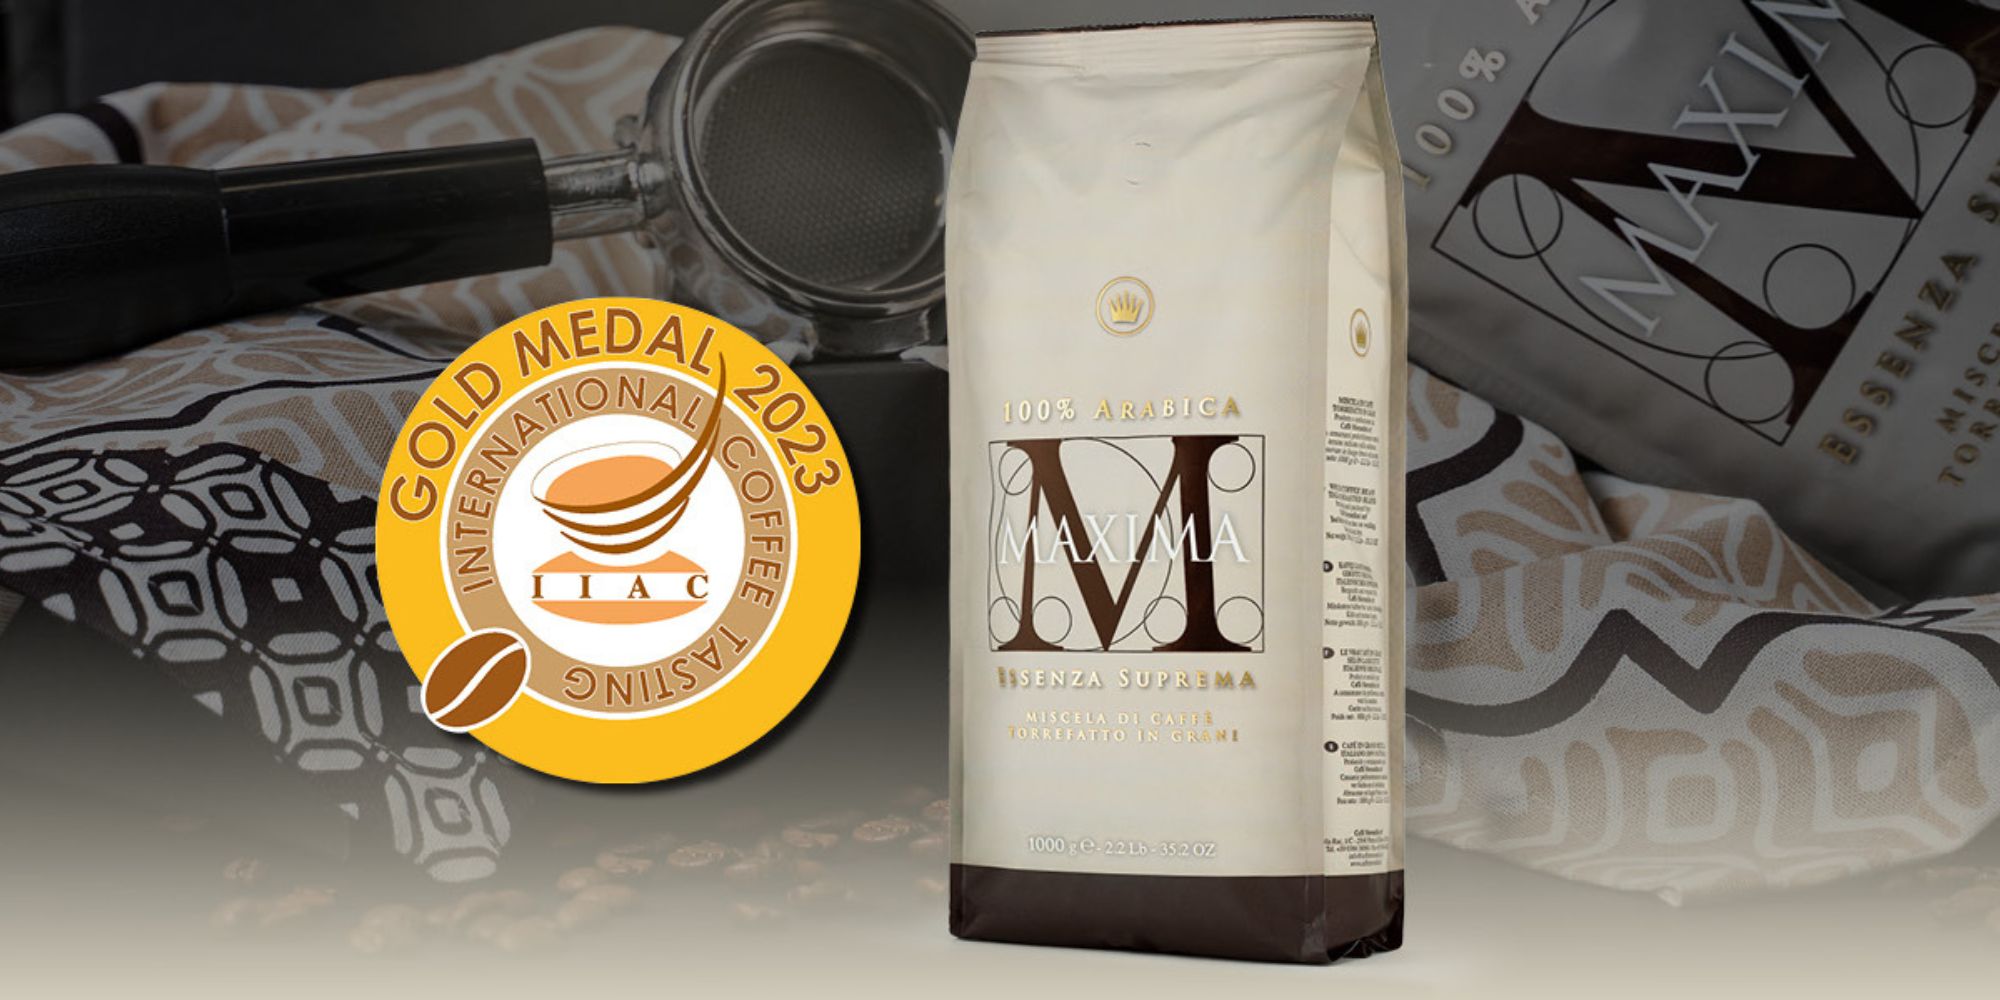 WE DID IT AGAIN: A NEW GOLD MEDAL AT THE INTERNATIONAL COFFEE TASTING